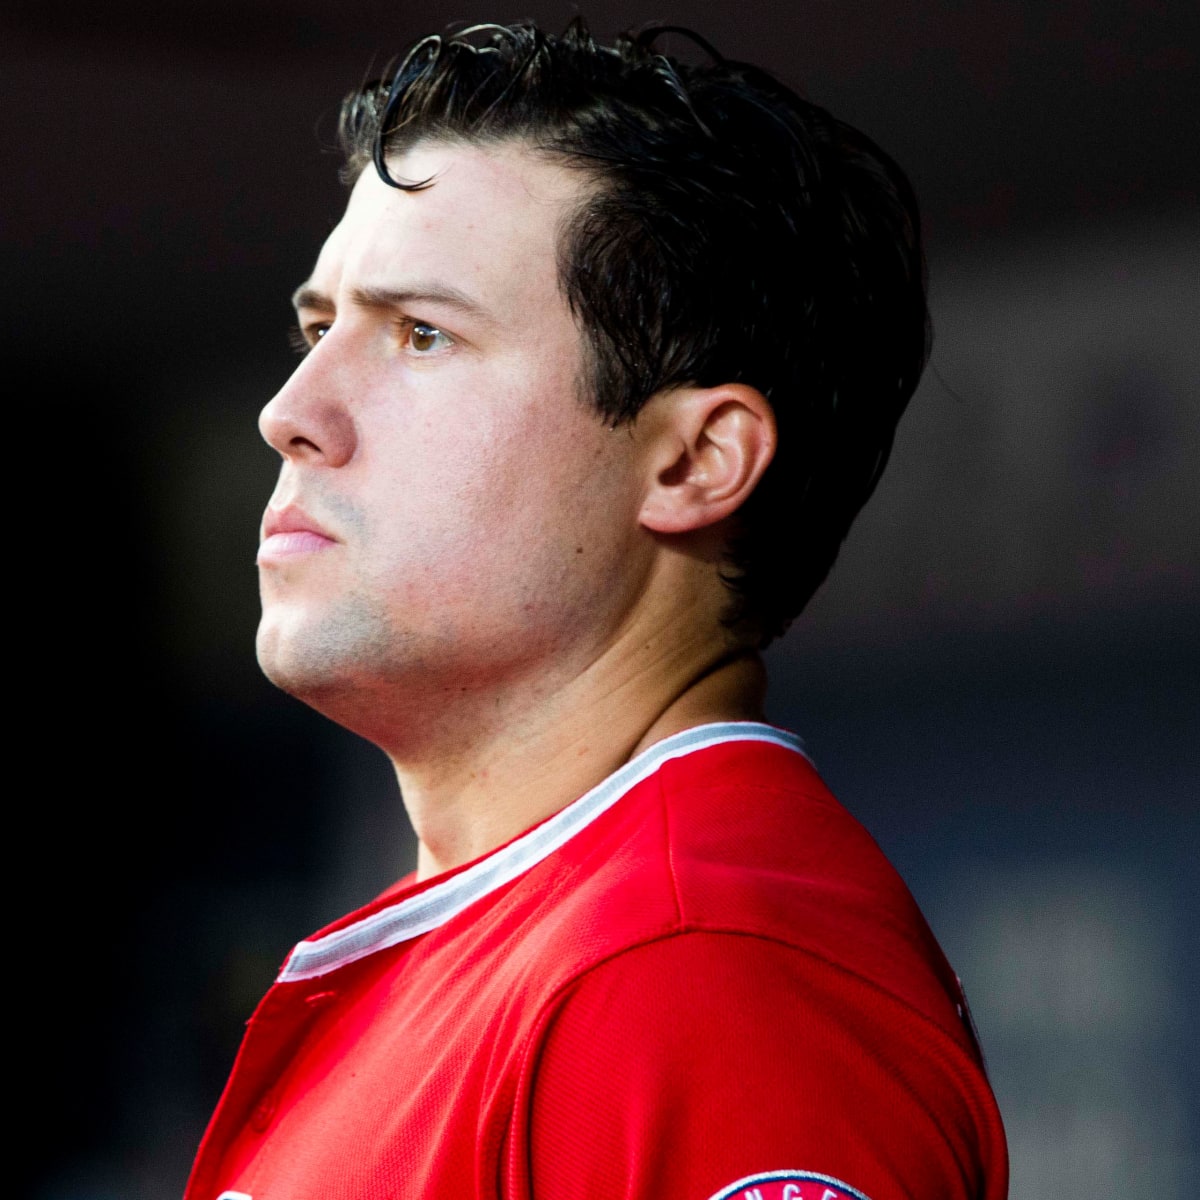 Angels pitcher Tyler Skaggs' death ruled accidental from mix of drugs,  alcohol